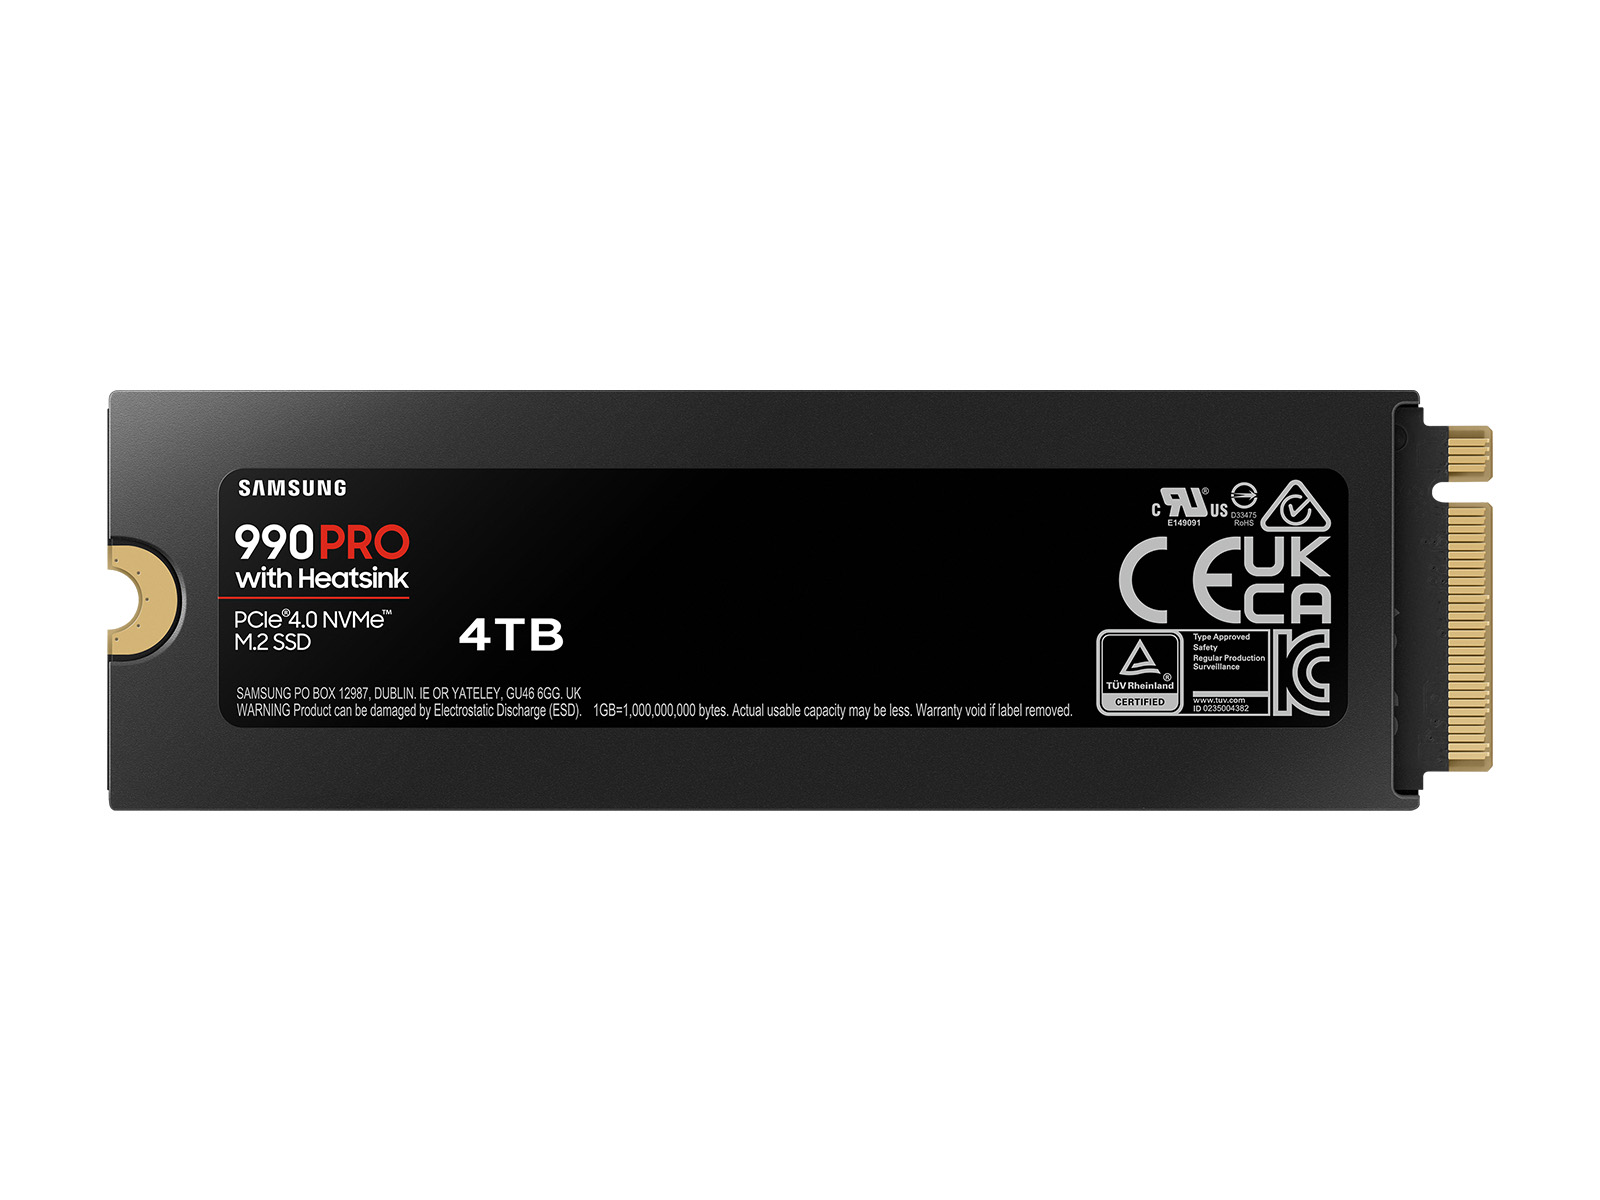 Samsung 990 PRO 4TB SSD Review - Fastest High Capacity Gen4 SSD